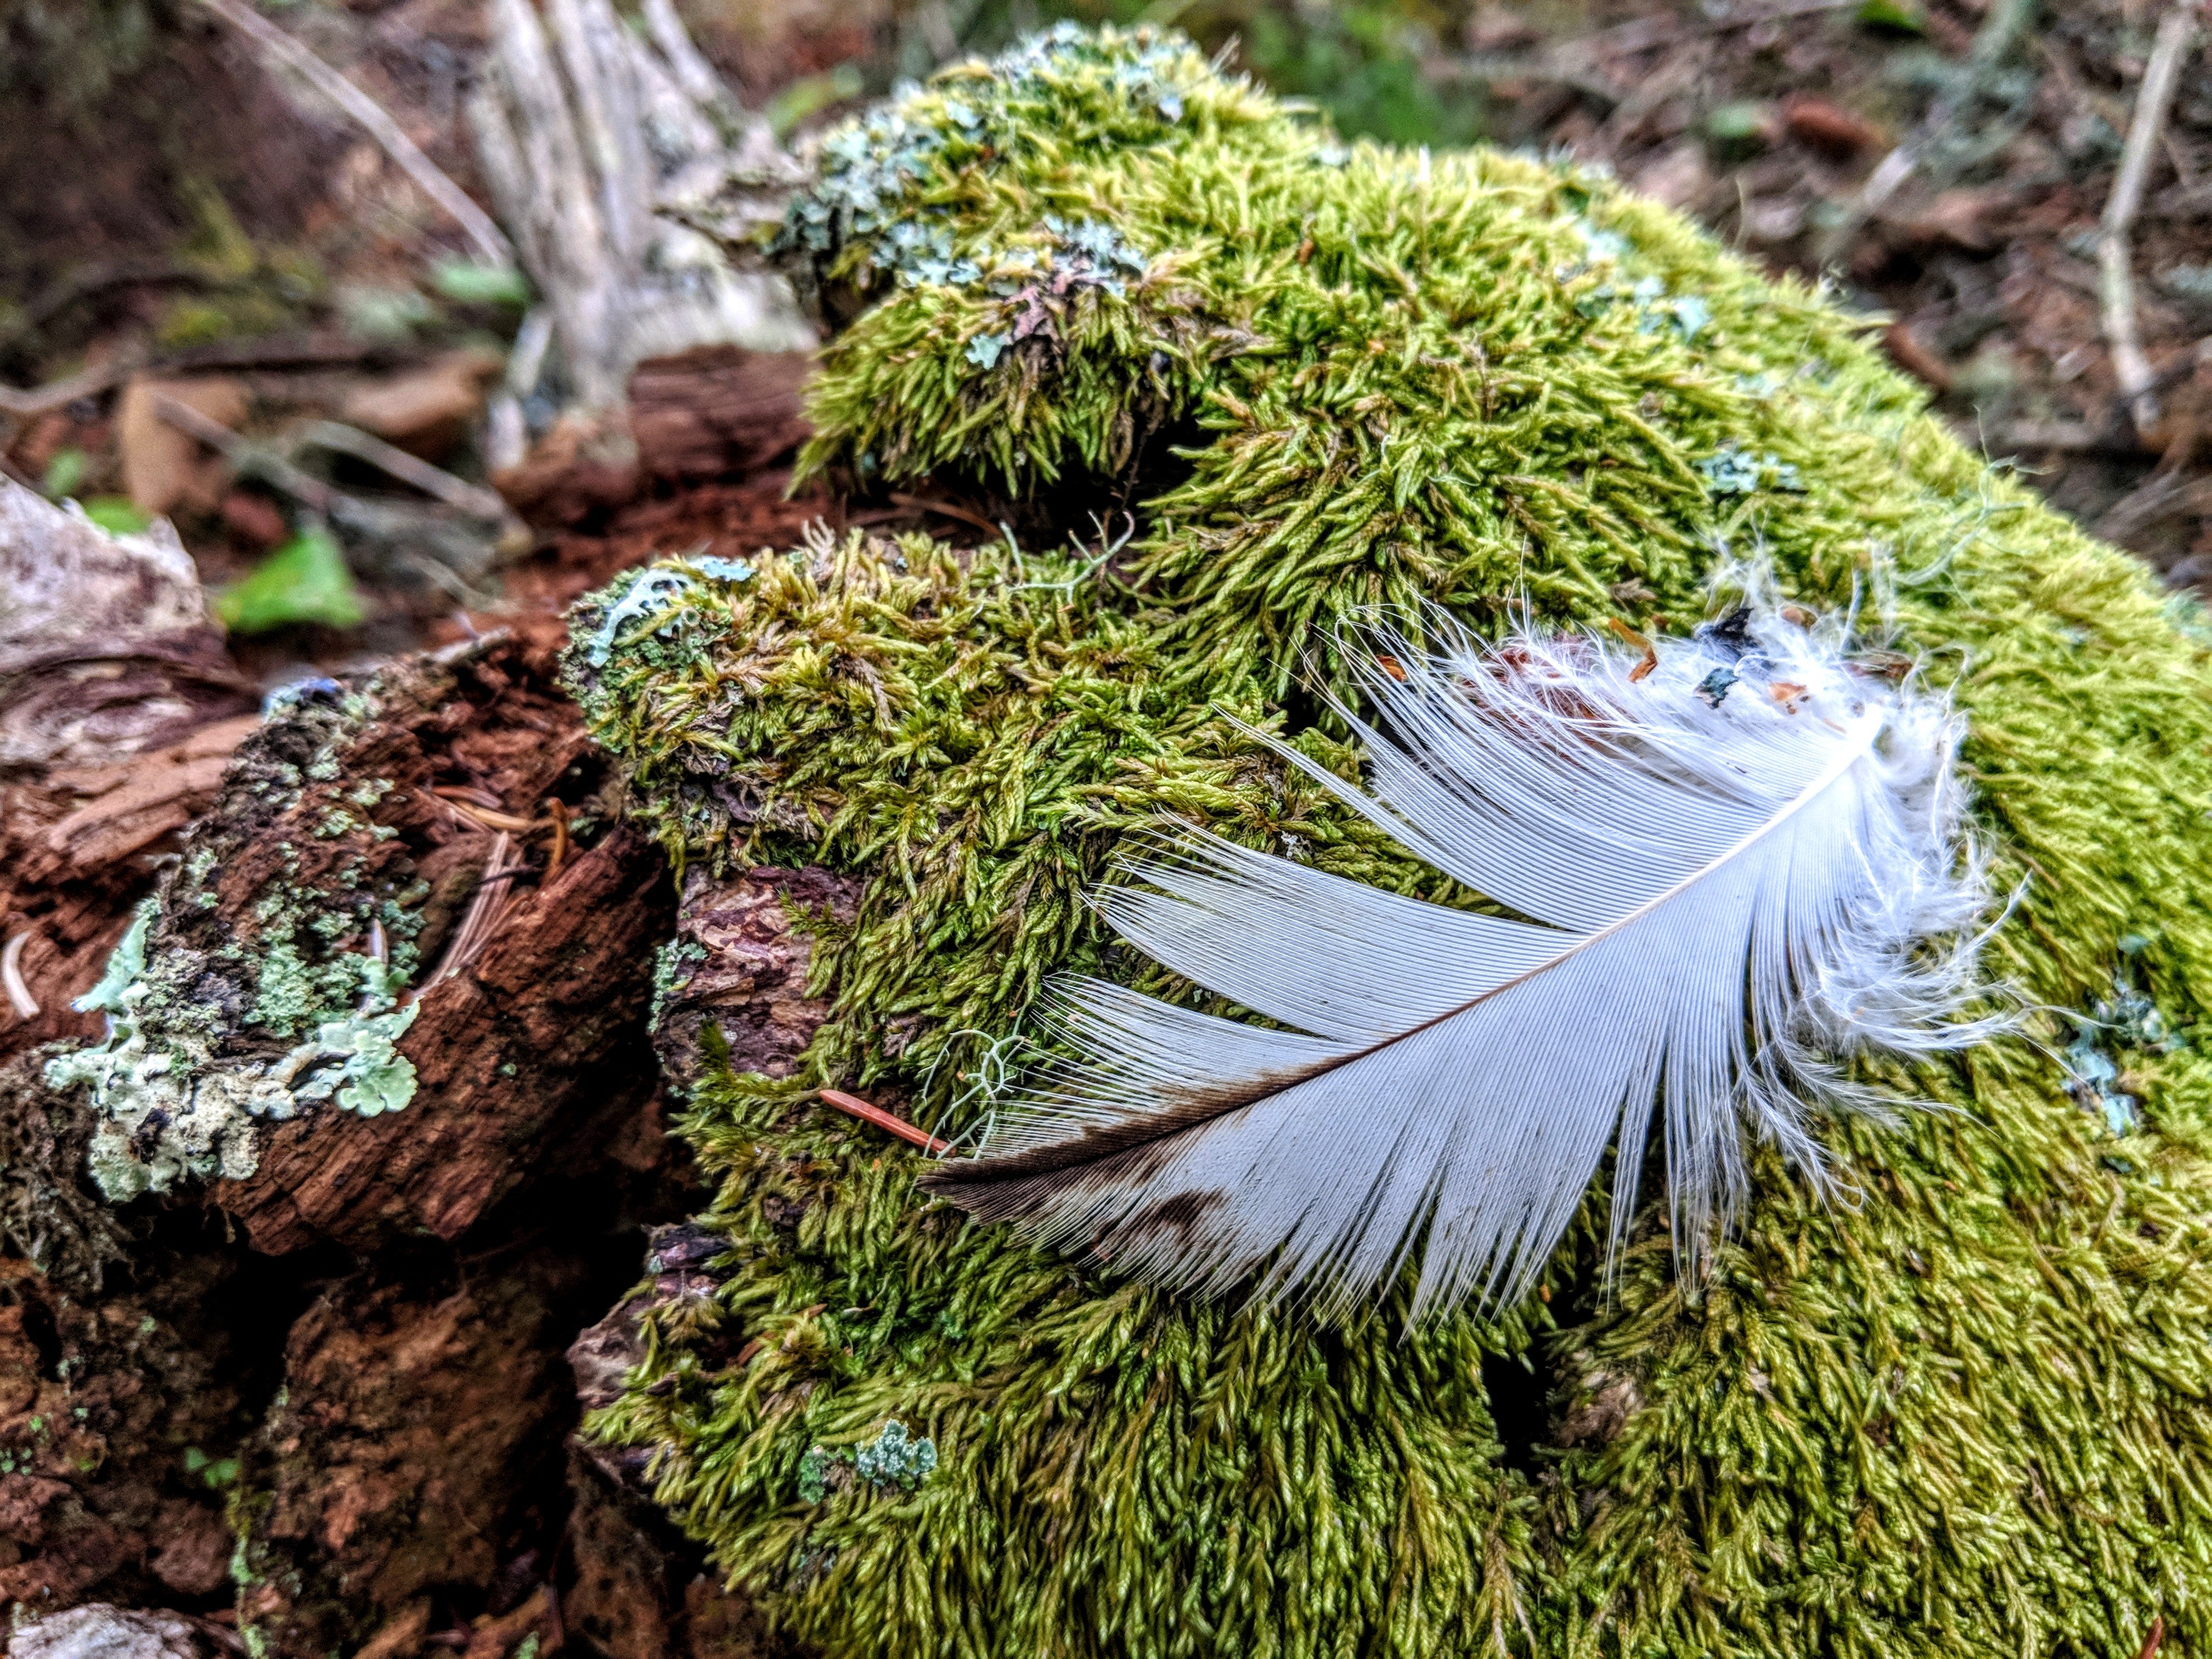 Covered in moss and lichen...and feathers!